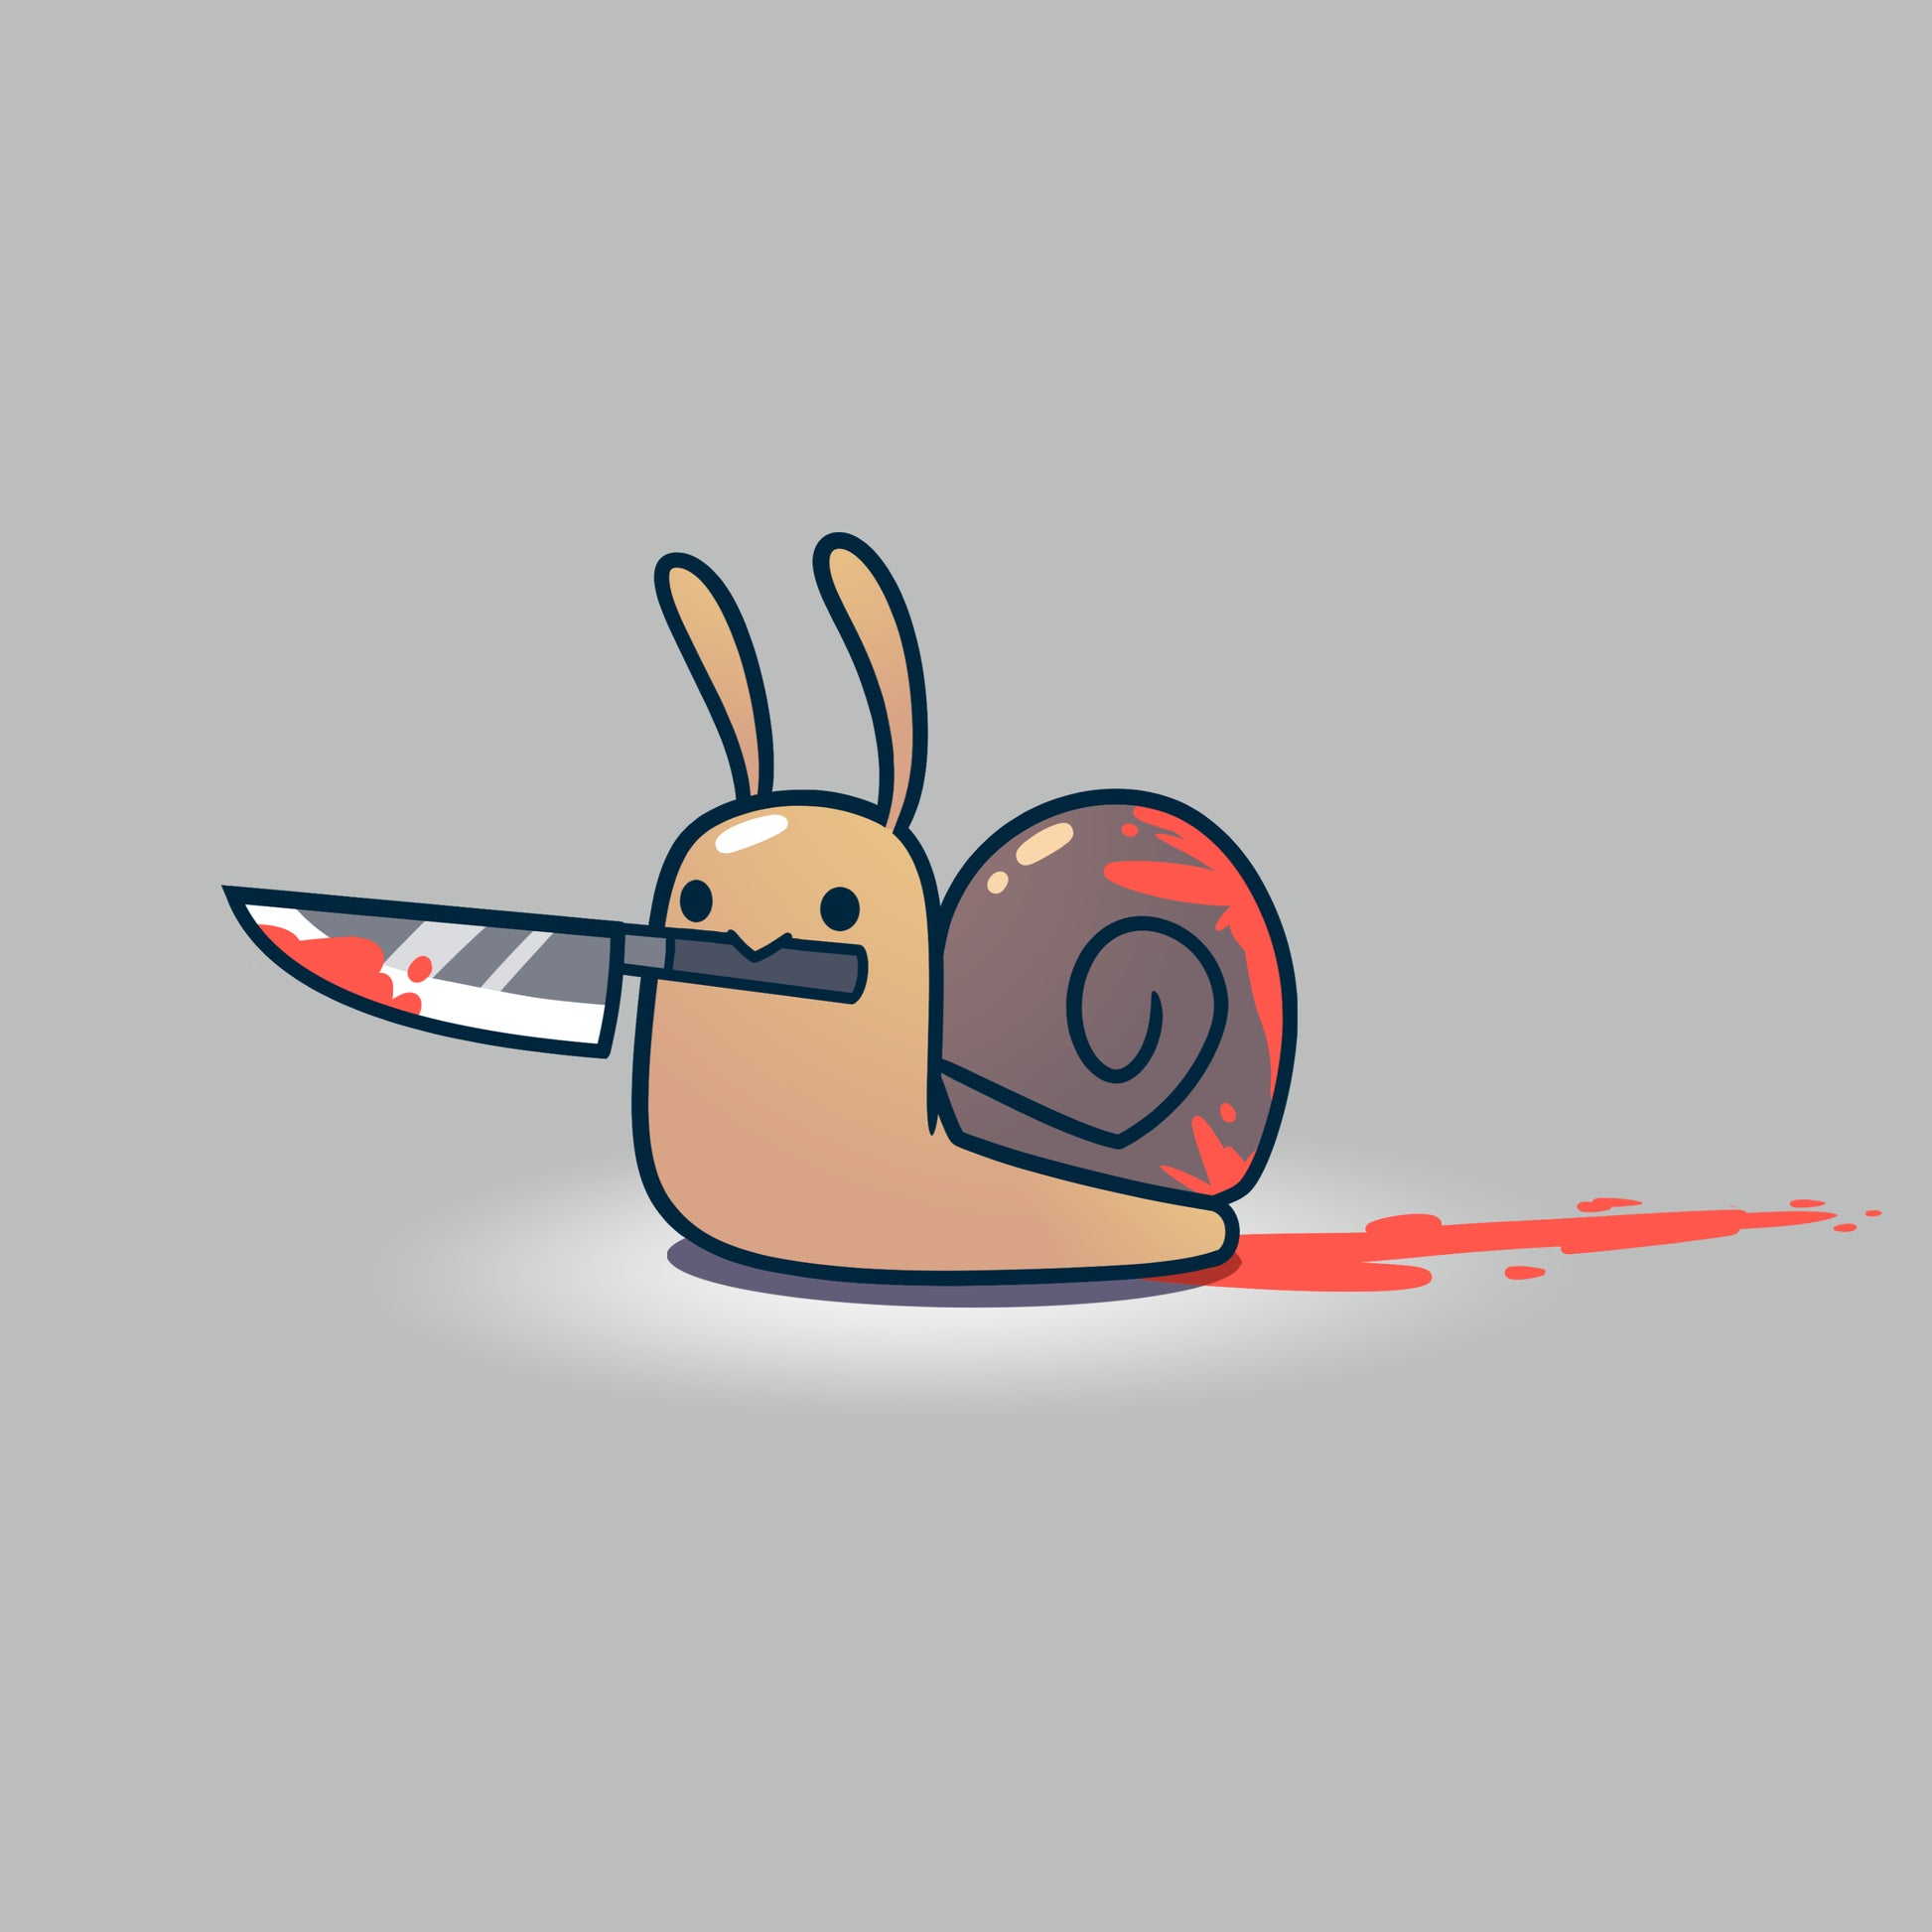 A cartoon snail with bunny ears holds a blood-stained knife in its mouth, leaving a trail of blood on the ground behind it. This eerie yet whimsical design is featured on the super soft cotton unisex tee, Killer Snail by monsterdigital, perfect for those who love unique and quirky fashion.